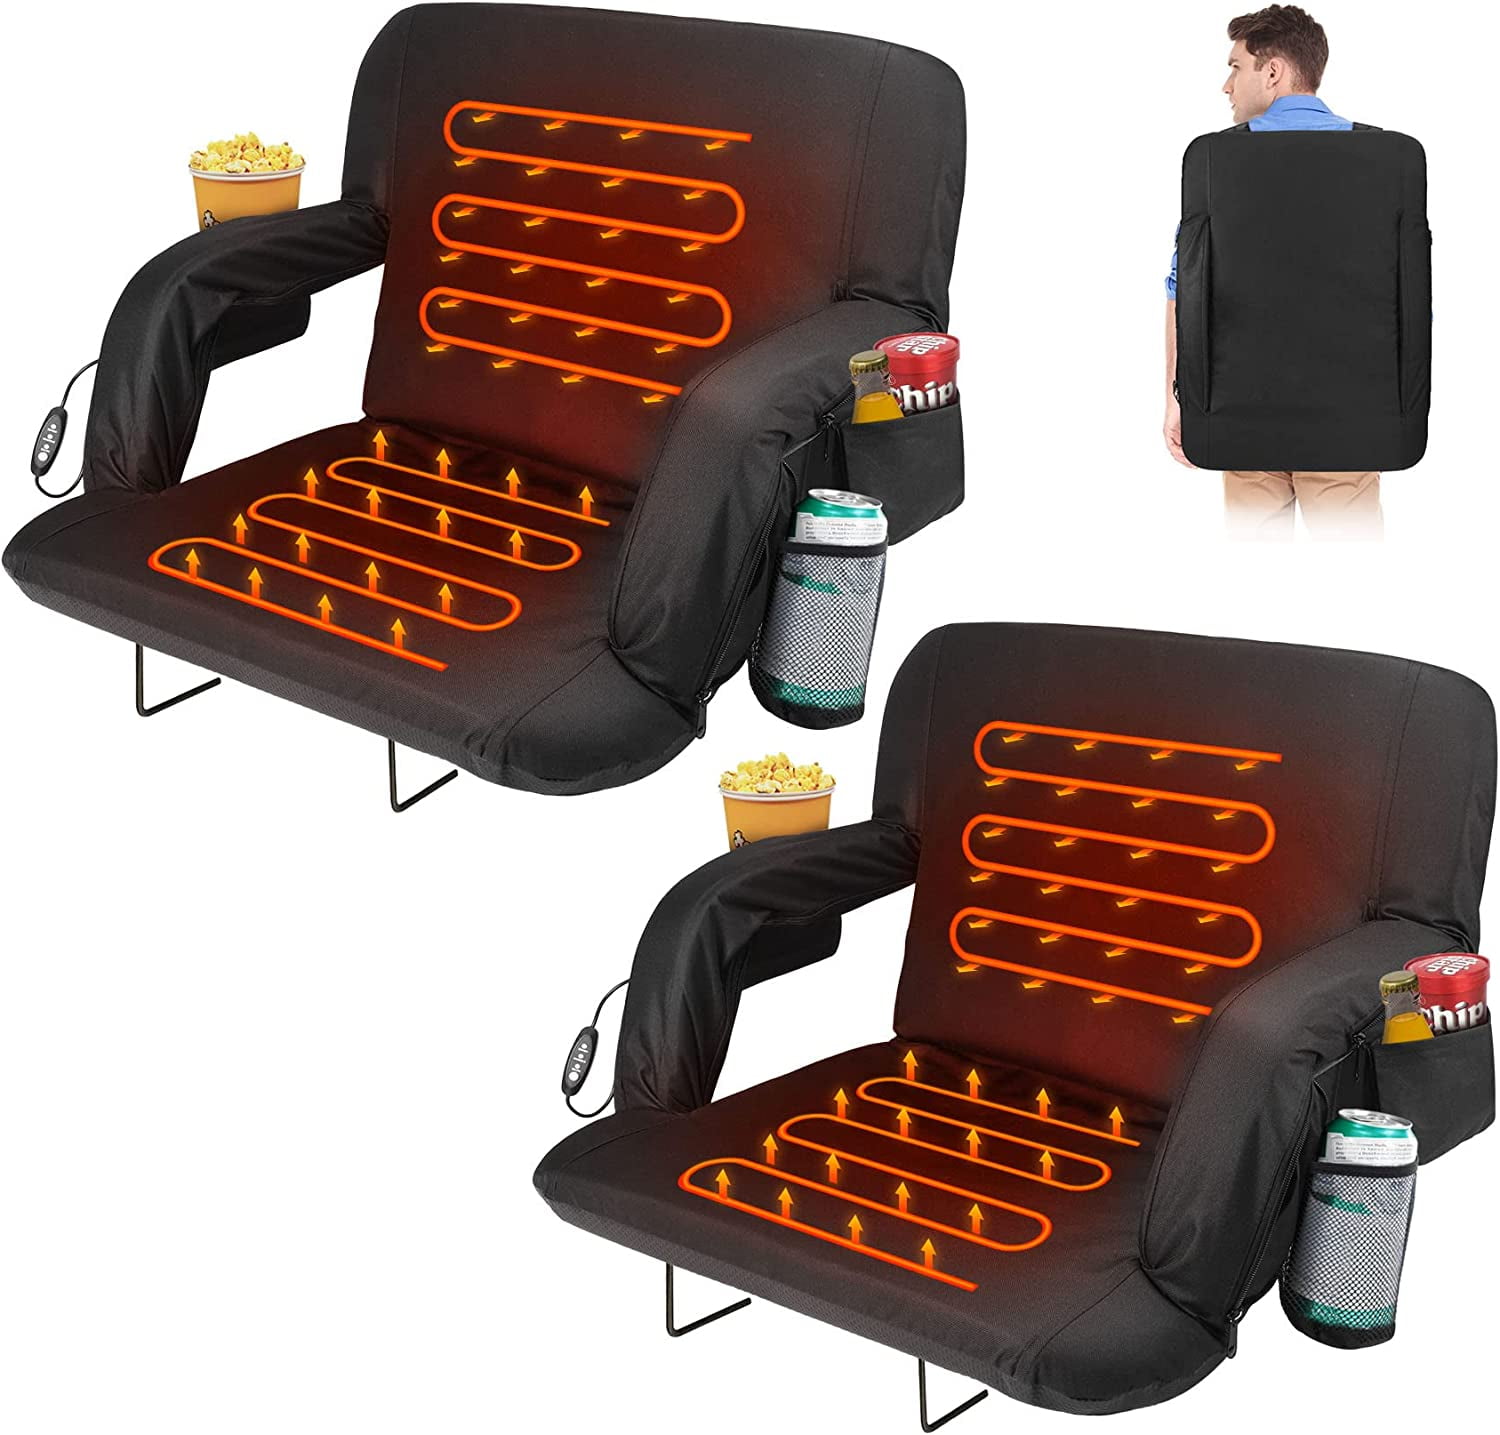 Heated Stadium Seats for Bleachers Rechargeable Heated Seat Cushion APP  Control 3 Levels of Heat Portable Foldable Chair w/Timing Function Warm